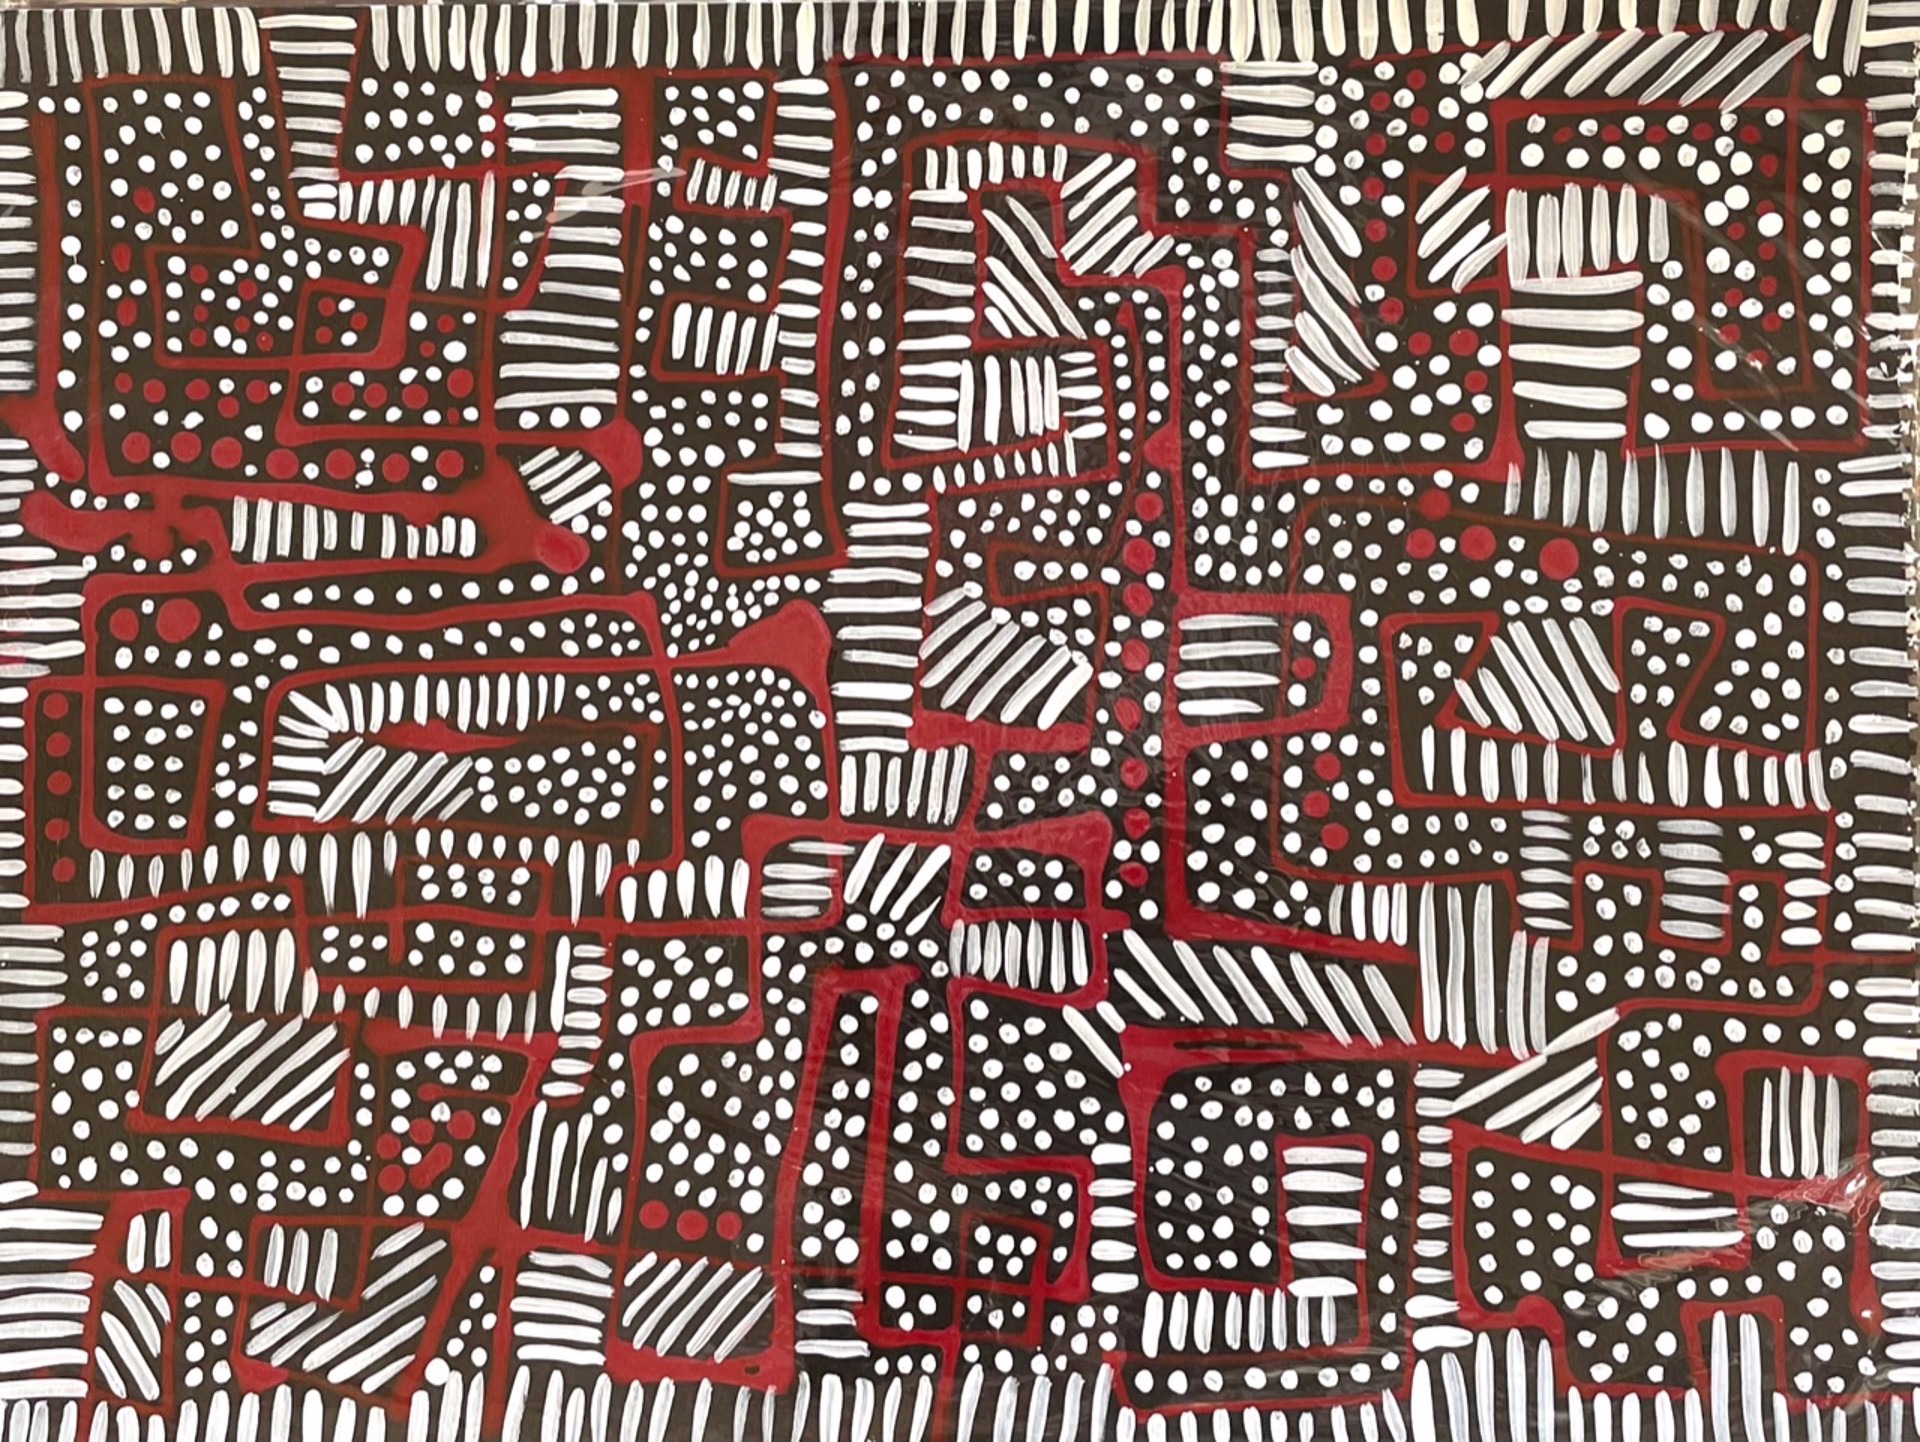 Mathematical Labyrinth Red, Black, White by Patricia Simpson